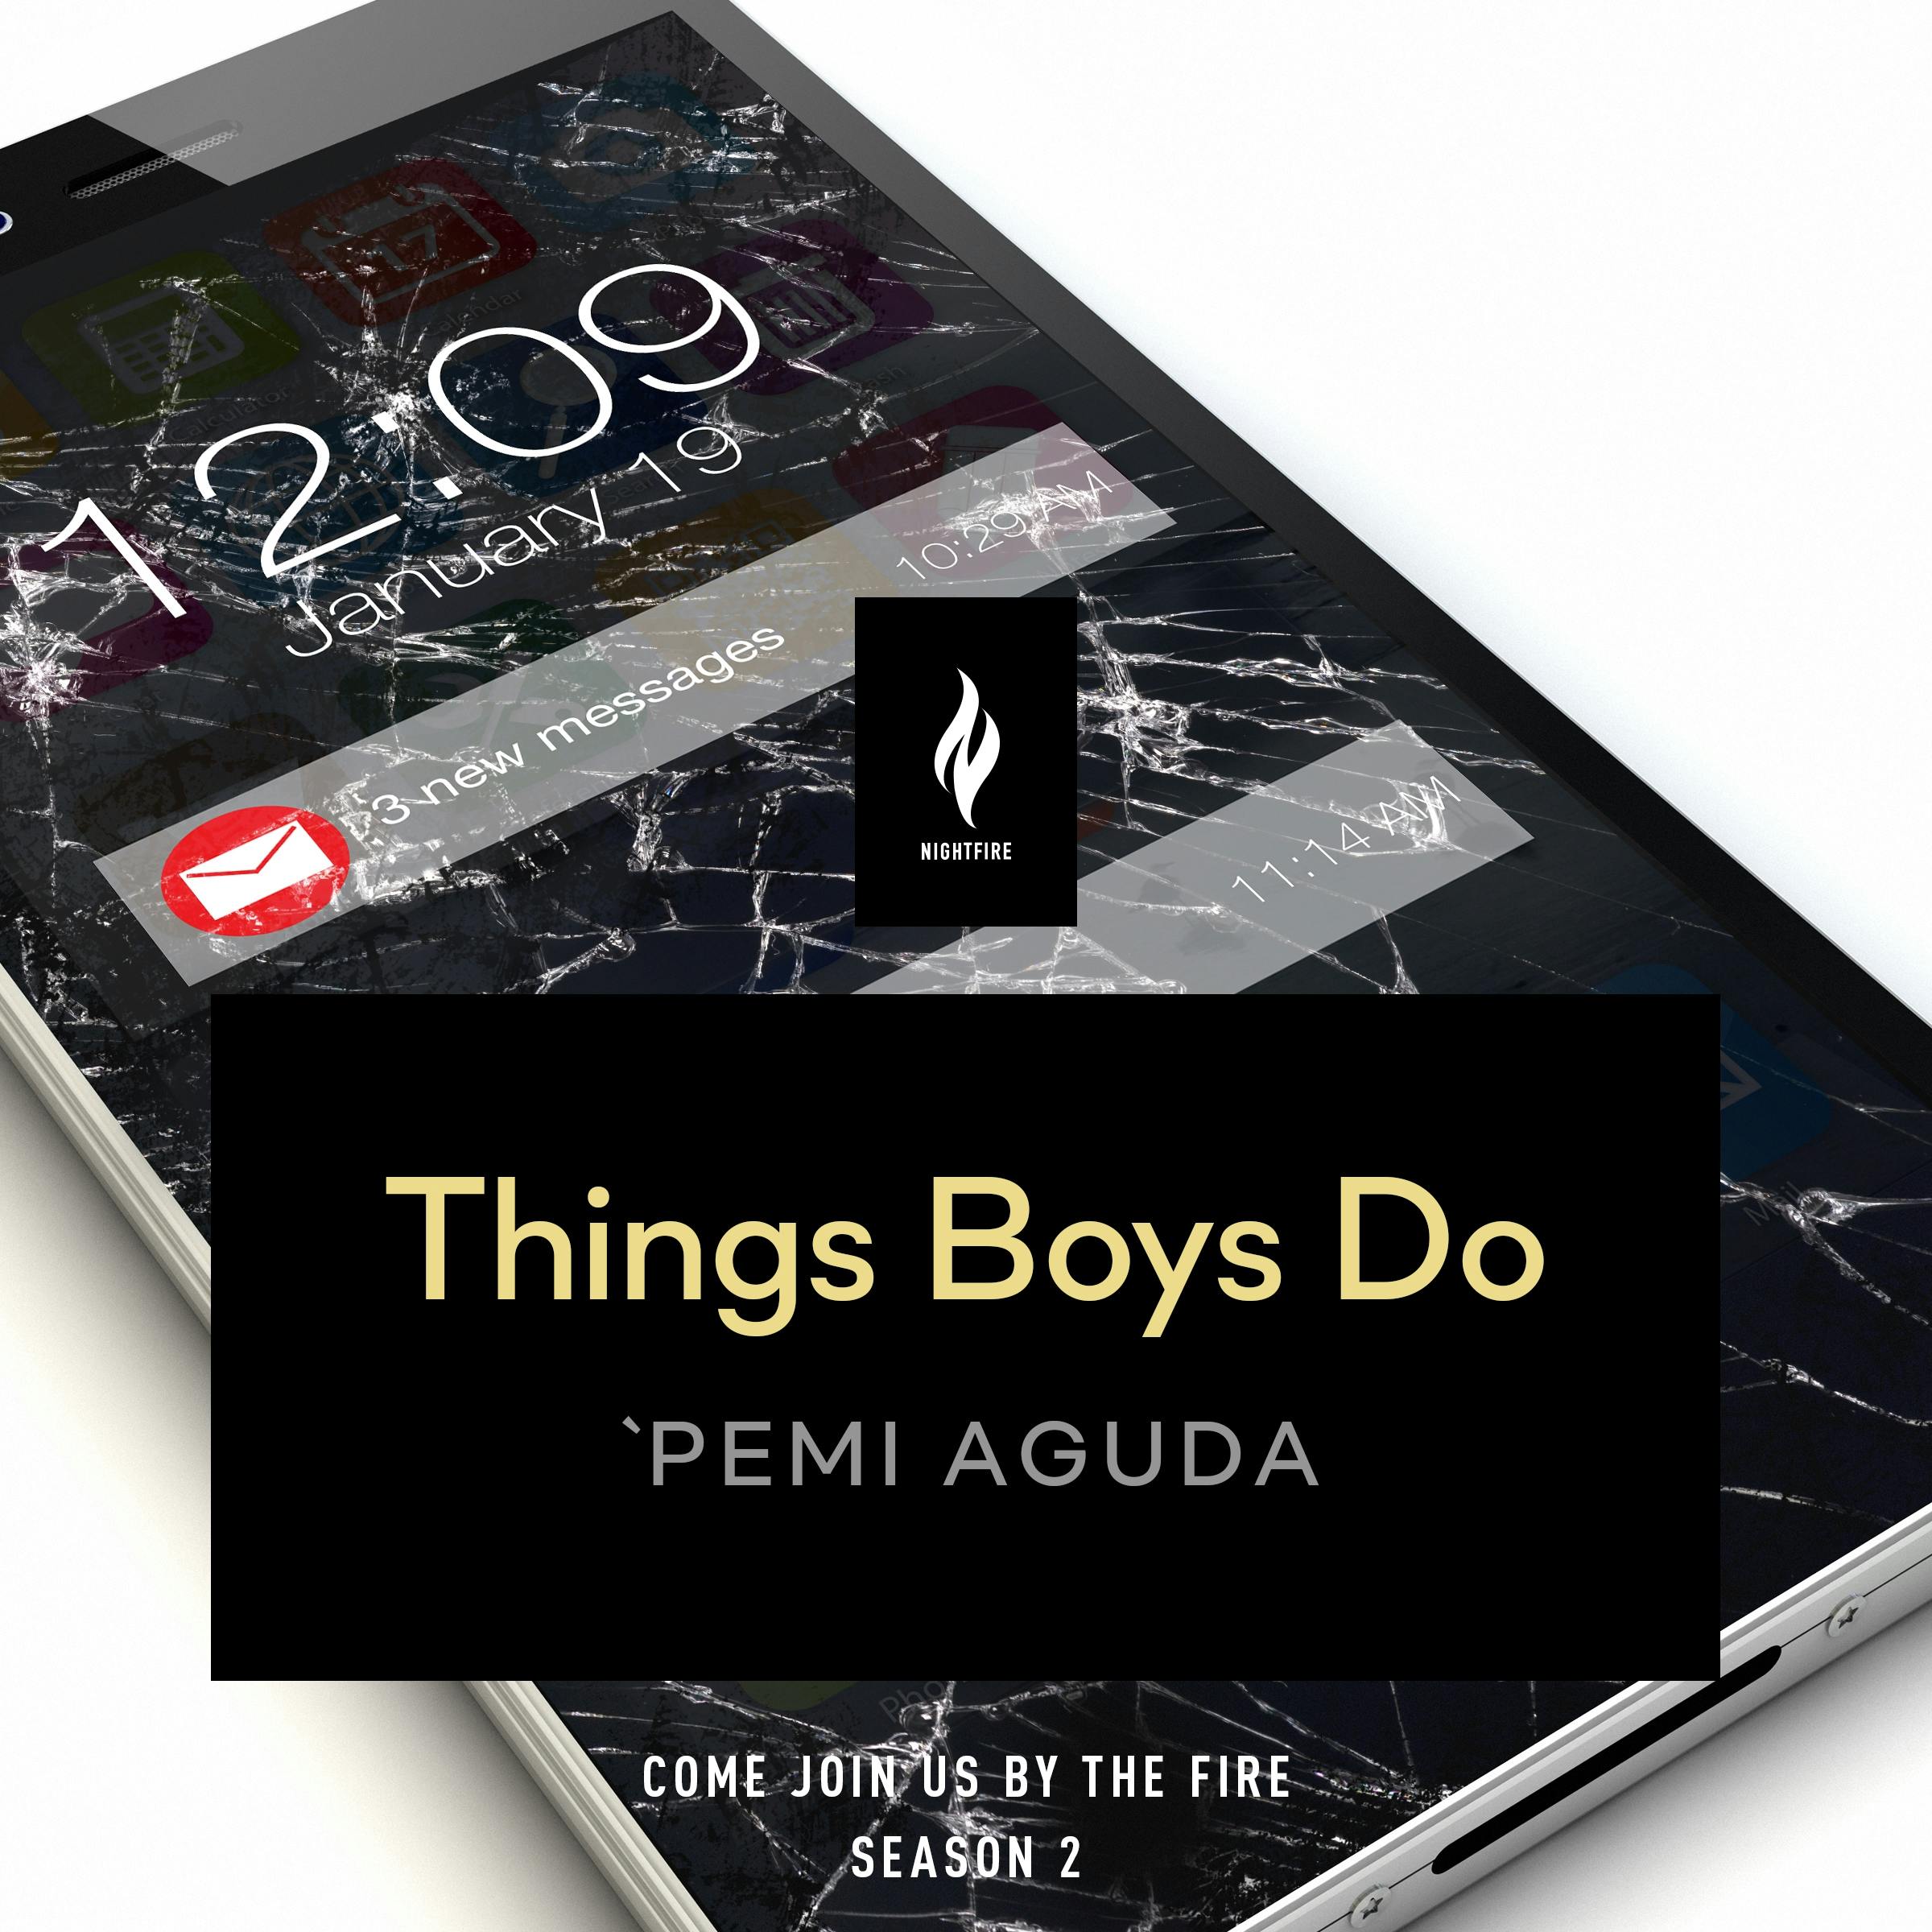 Cover for the book titled as: Things Boys Do